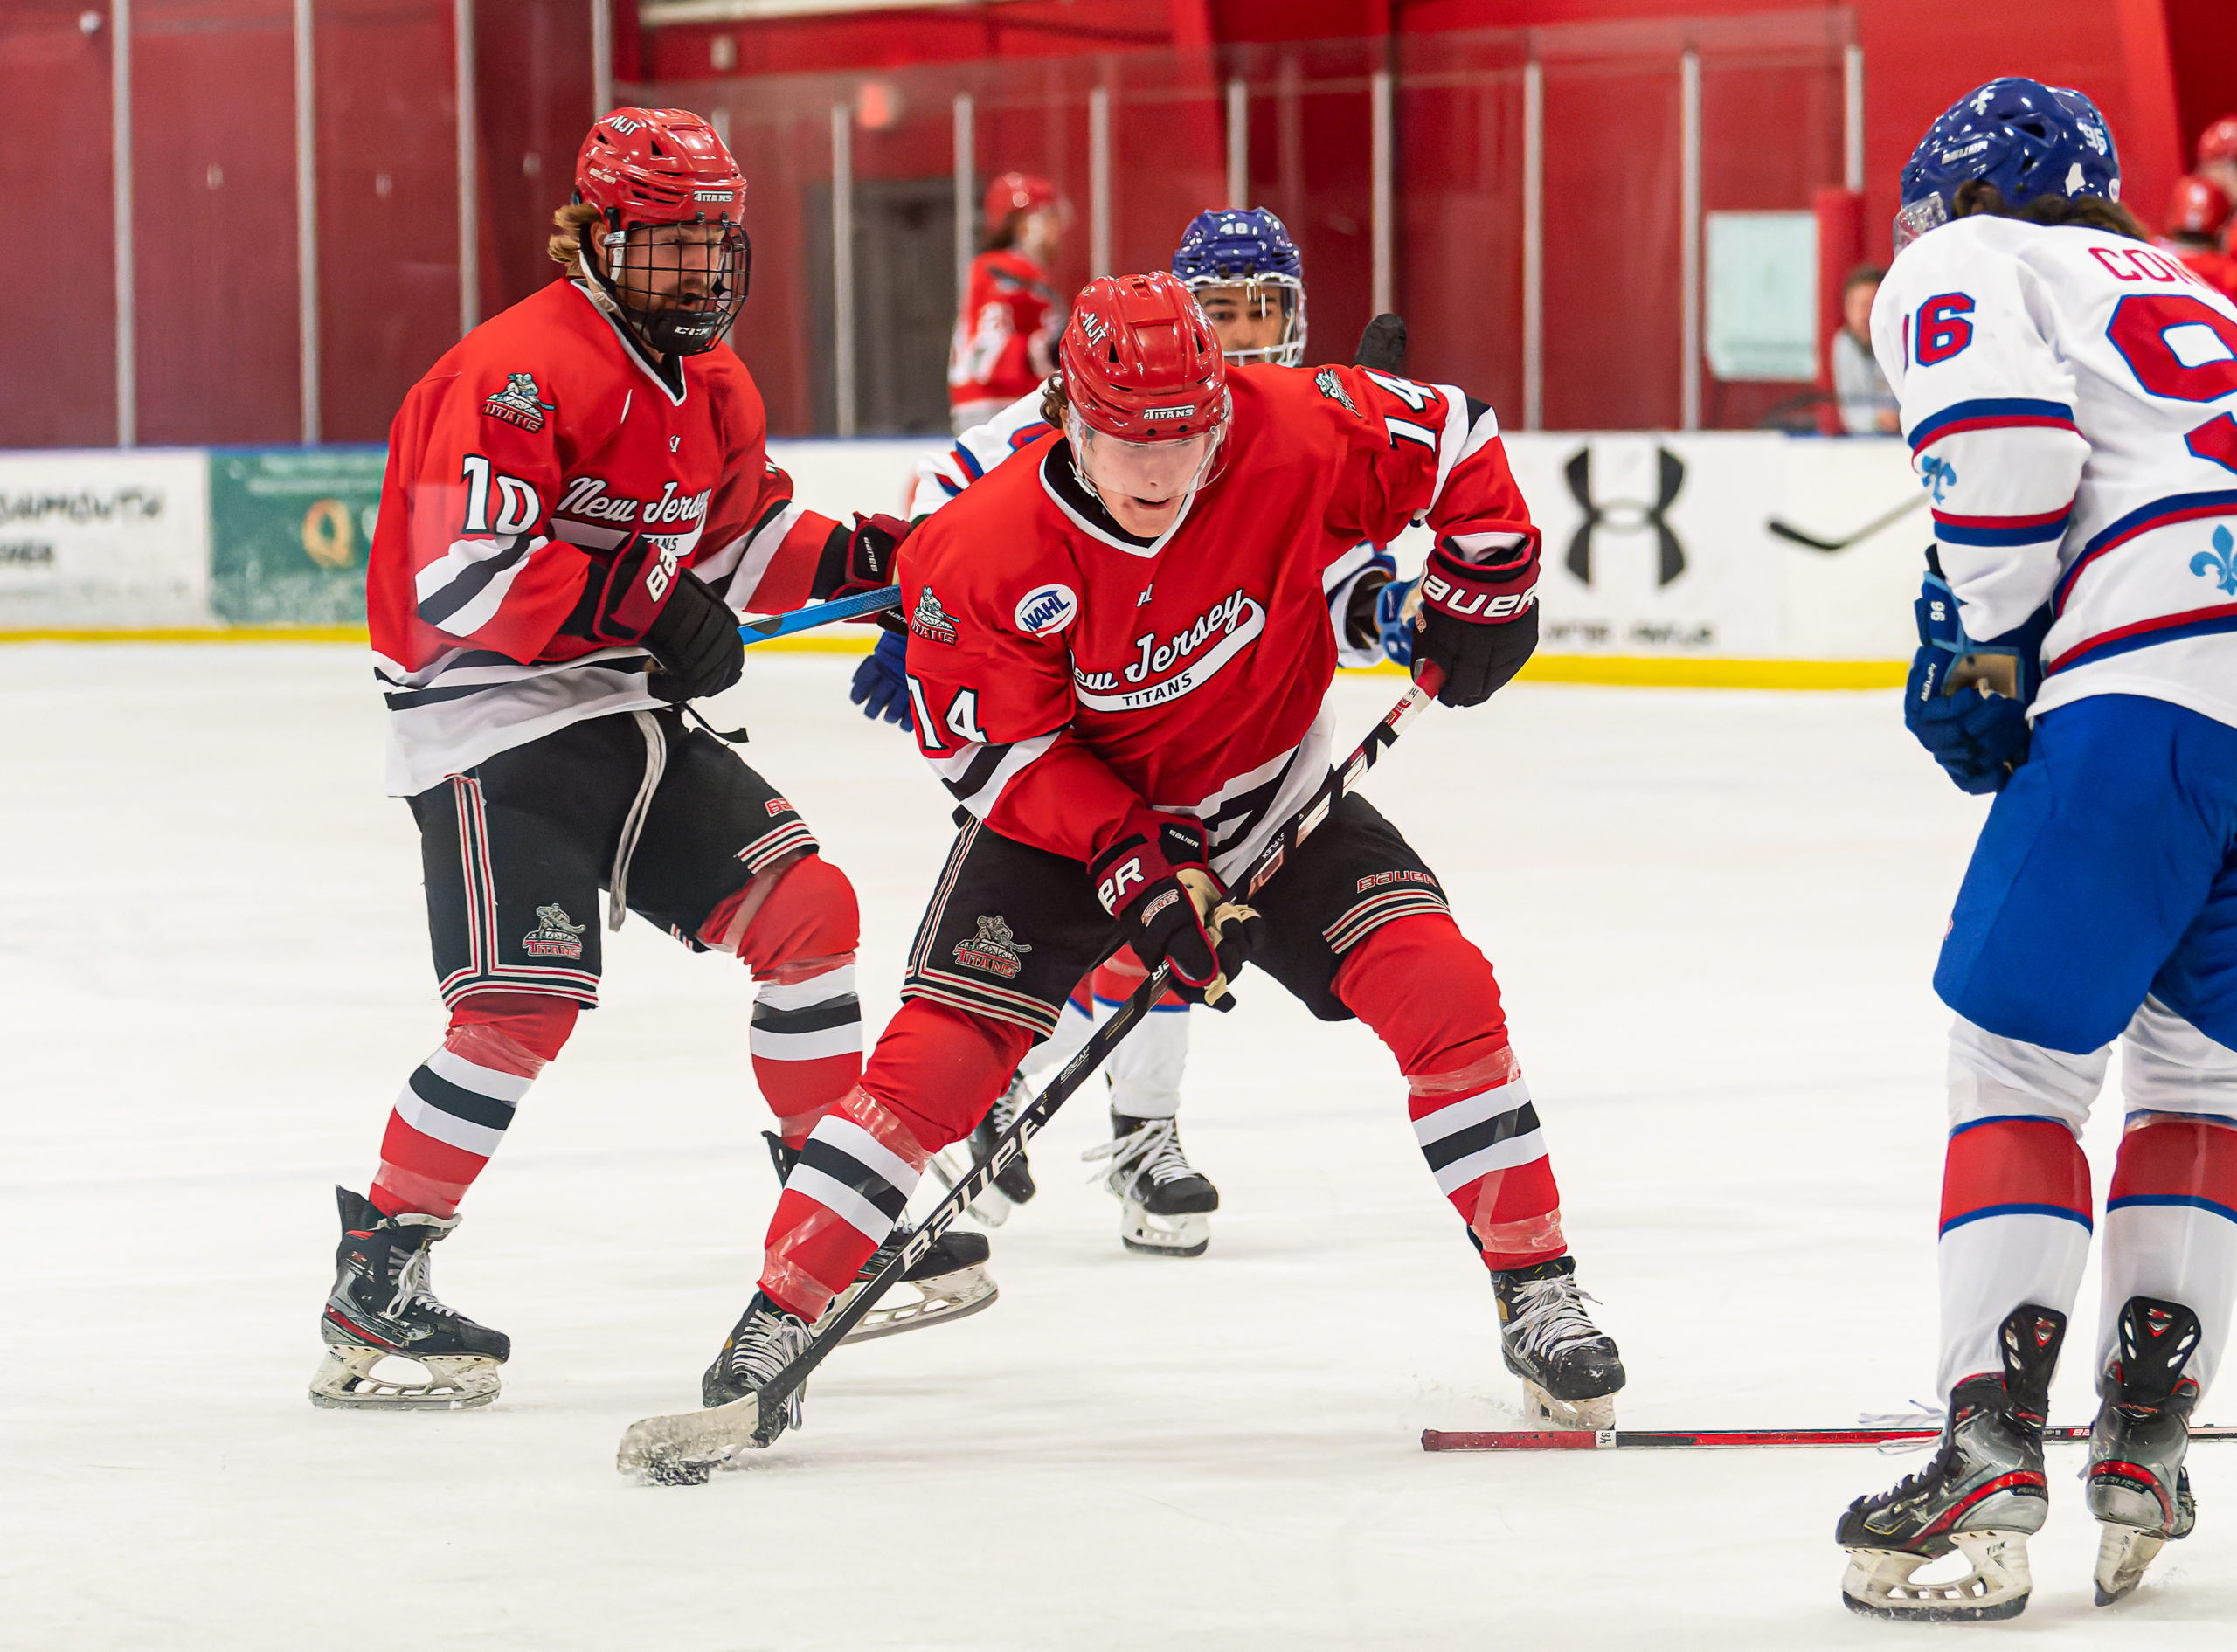 Weekend Preview: December 17 & 18 – Titans travel to Maine for last series before holiday break